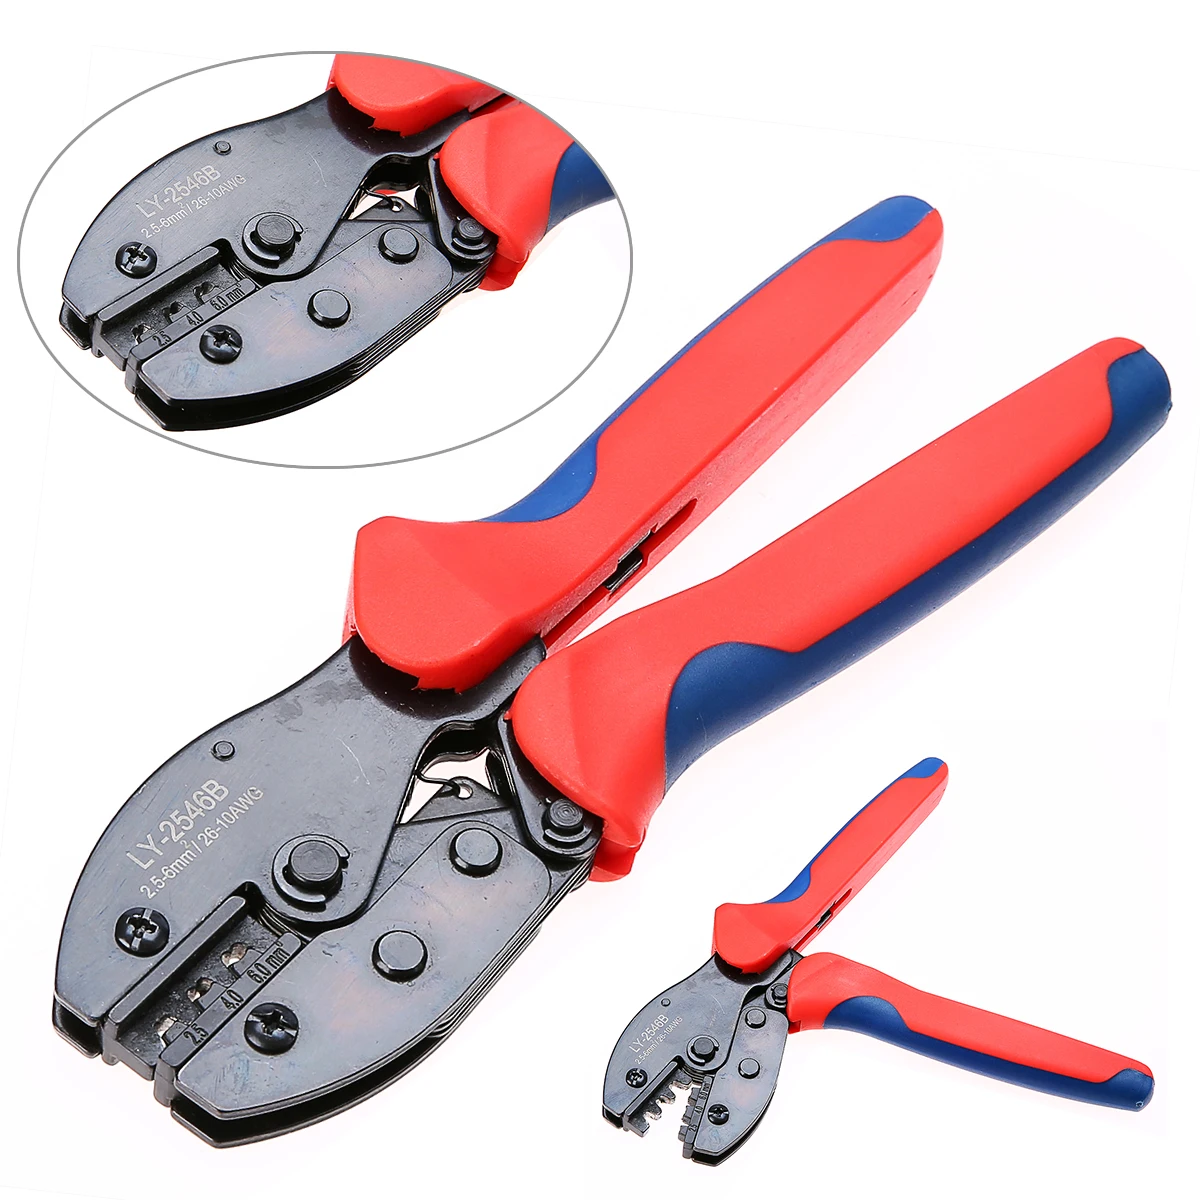 MC4 Crimping Plier Solar Panel Connector Tool Wire Cable Crimping Pliers - $27.57